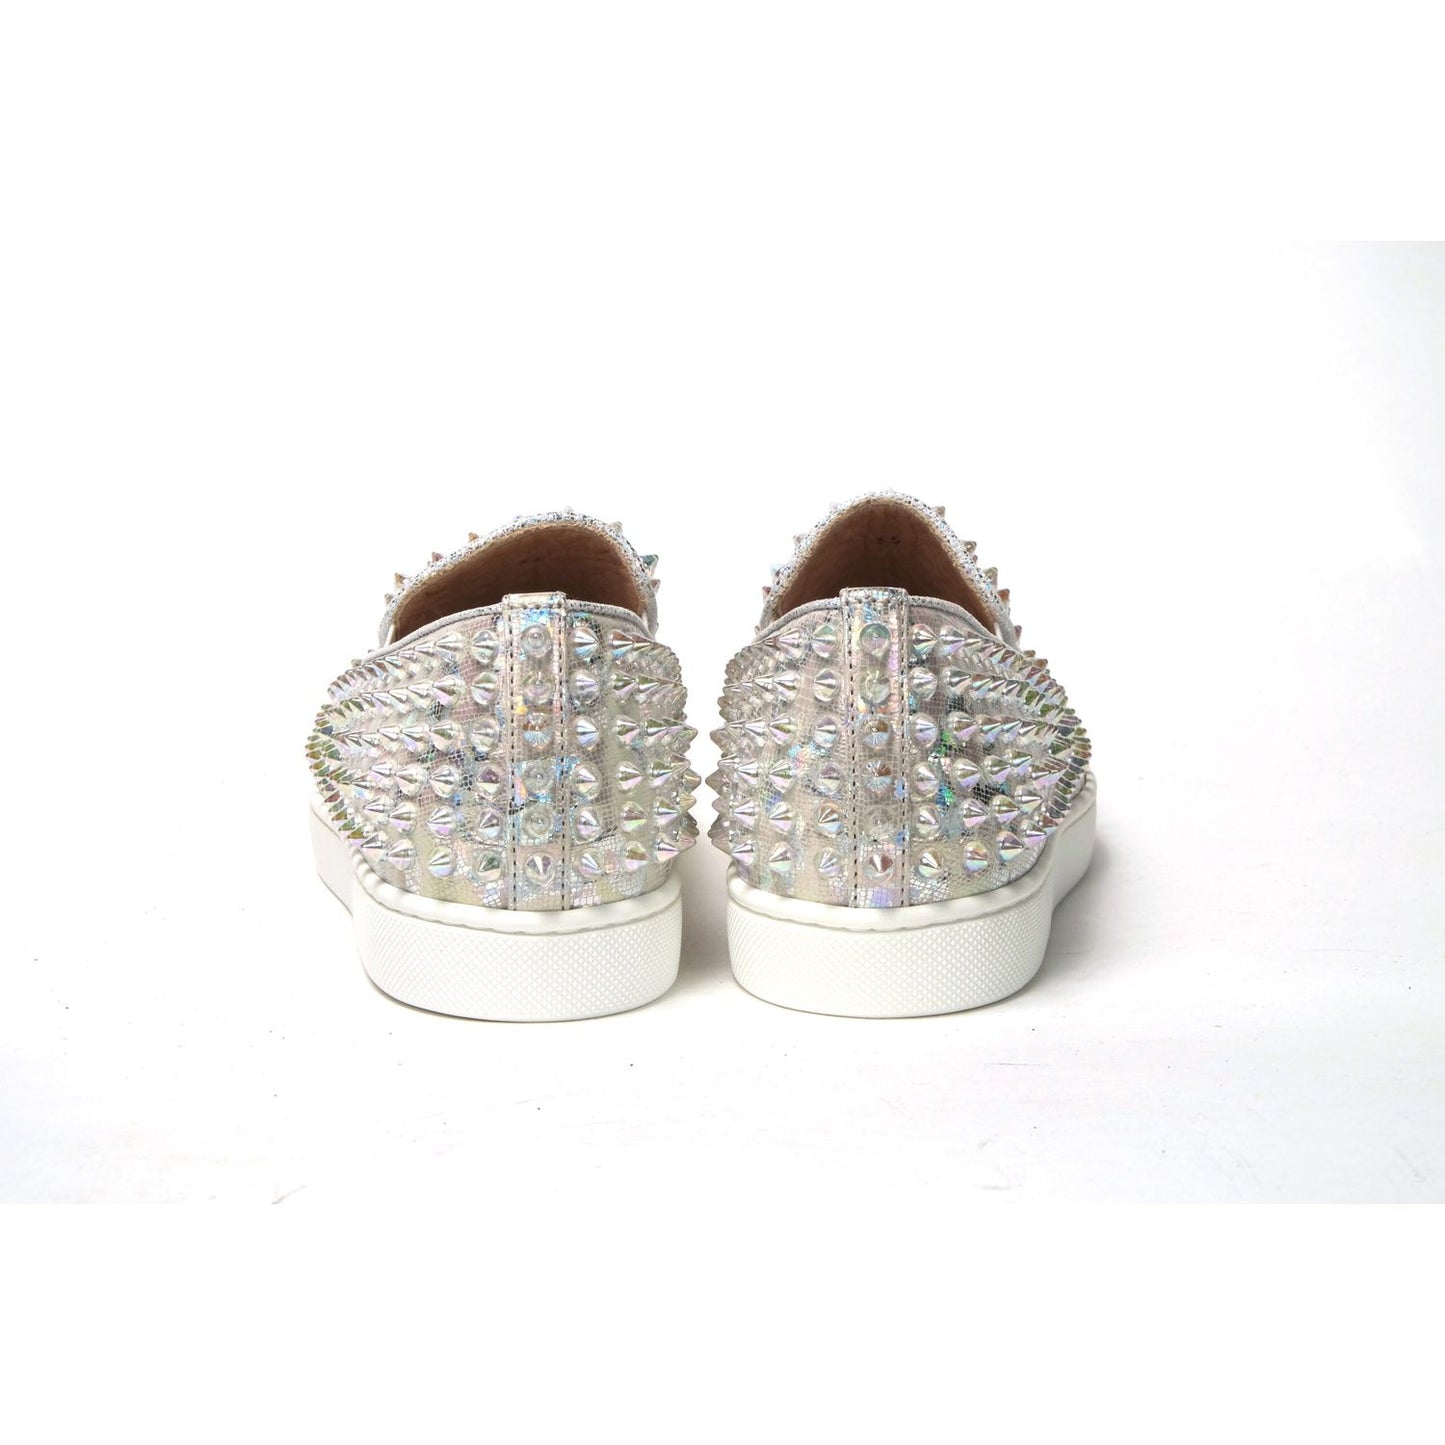 White Ab/Clear Ab Roller Boat Woman Flat Sneaker